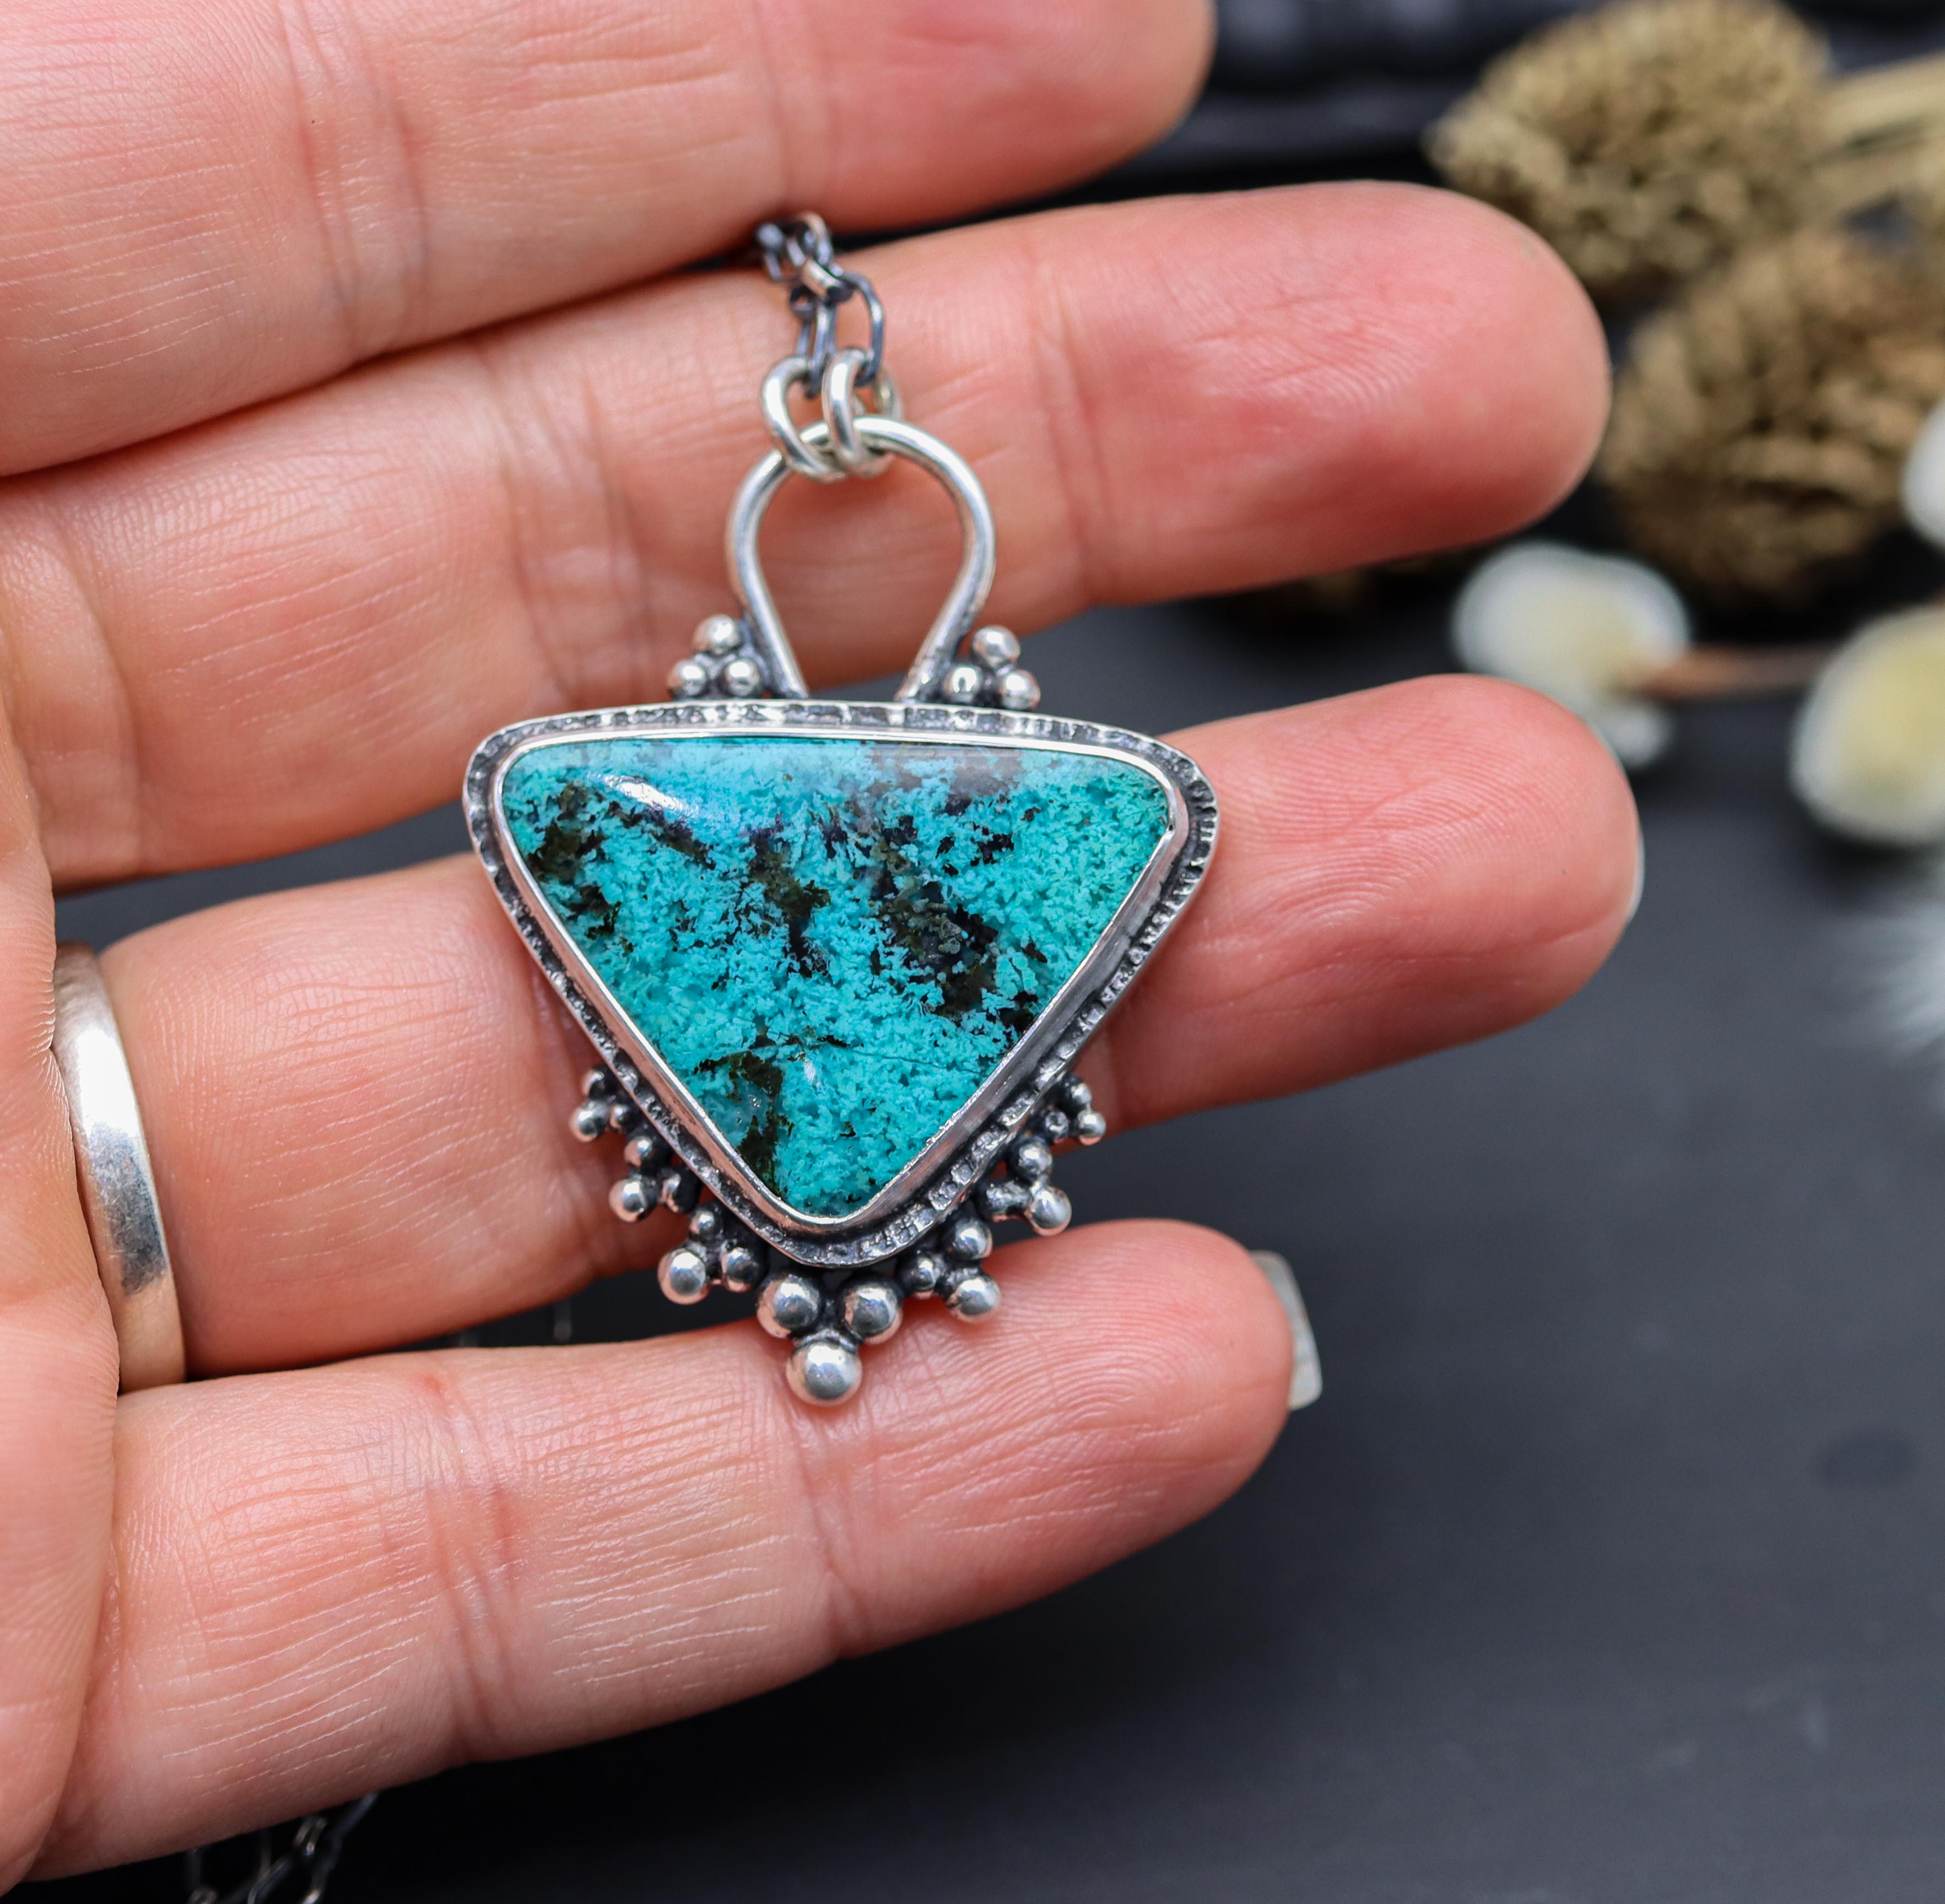 Chrysocolla Pendant Sterling Silver One Of a Kind Gemstone Necklace